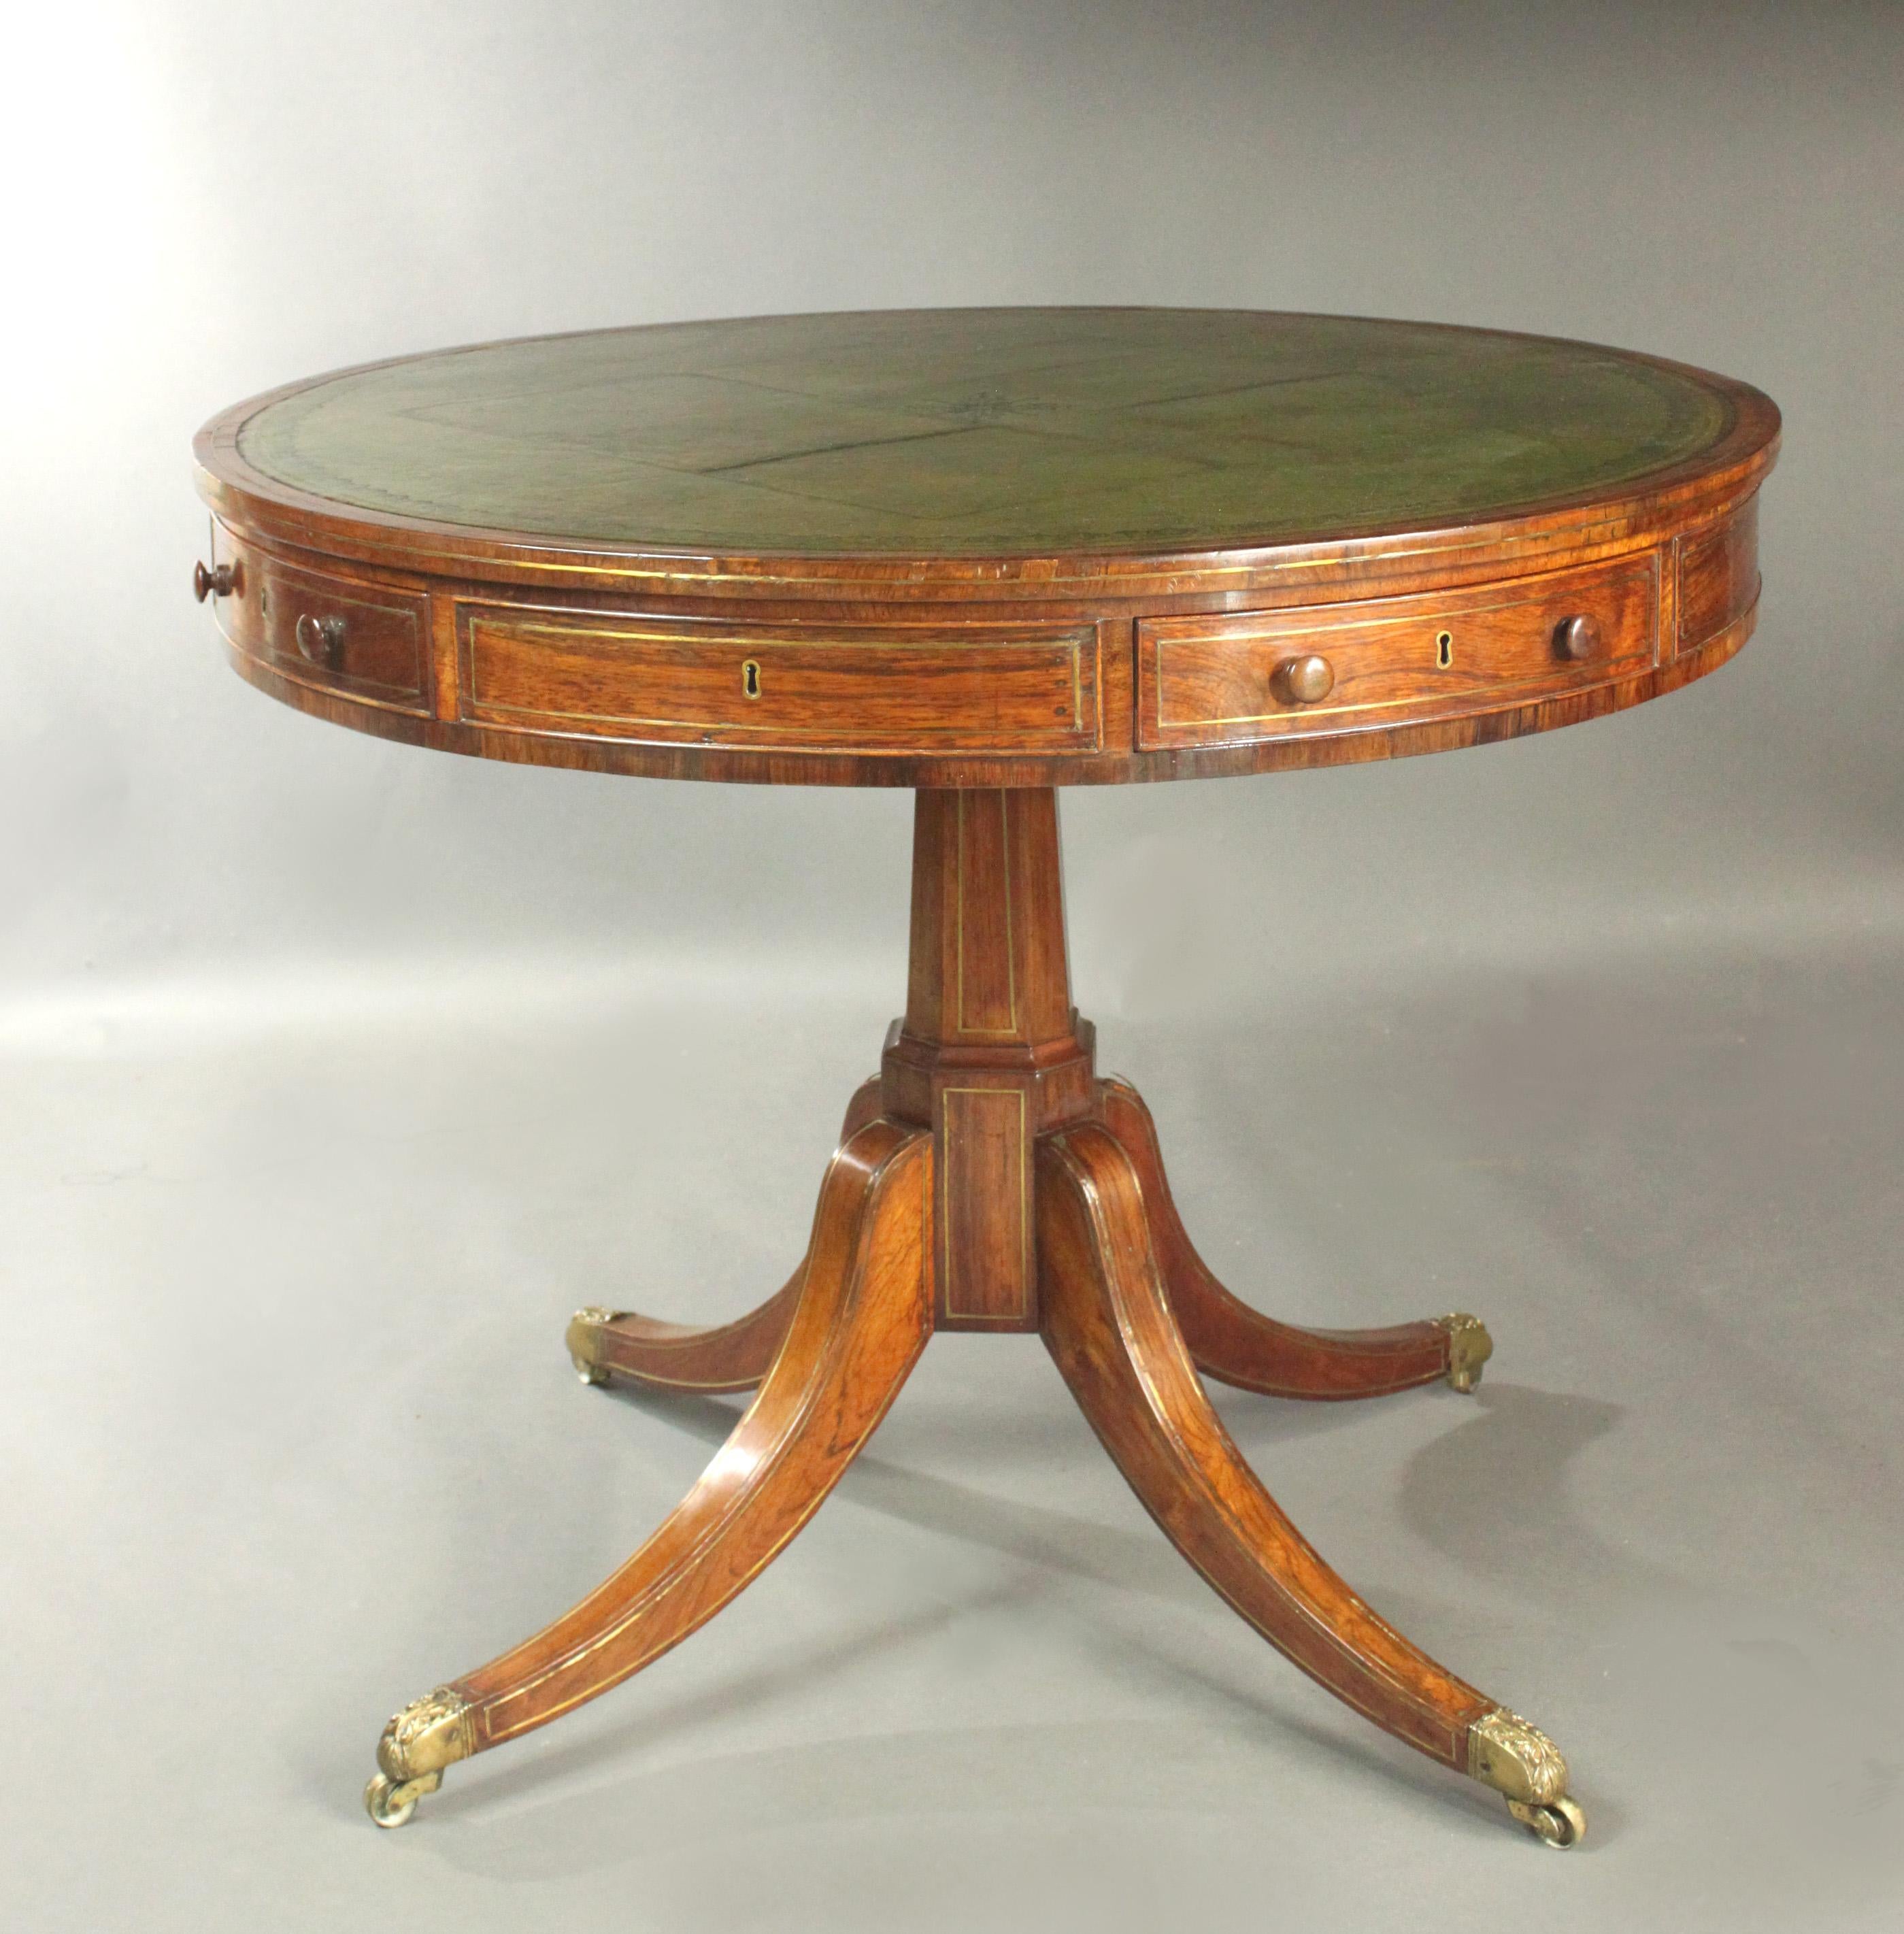 A fine quality Regency rosewood drum table with attractive brass stringing, good small size and original colour and patina. Handsome faceted column, sabre legs and cup castors with acanthus leaves which still retain their old lacquer finish. The top